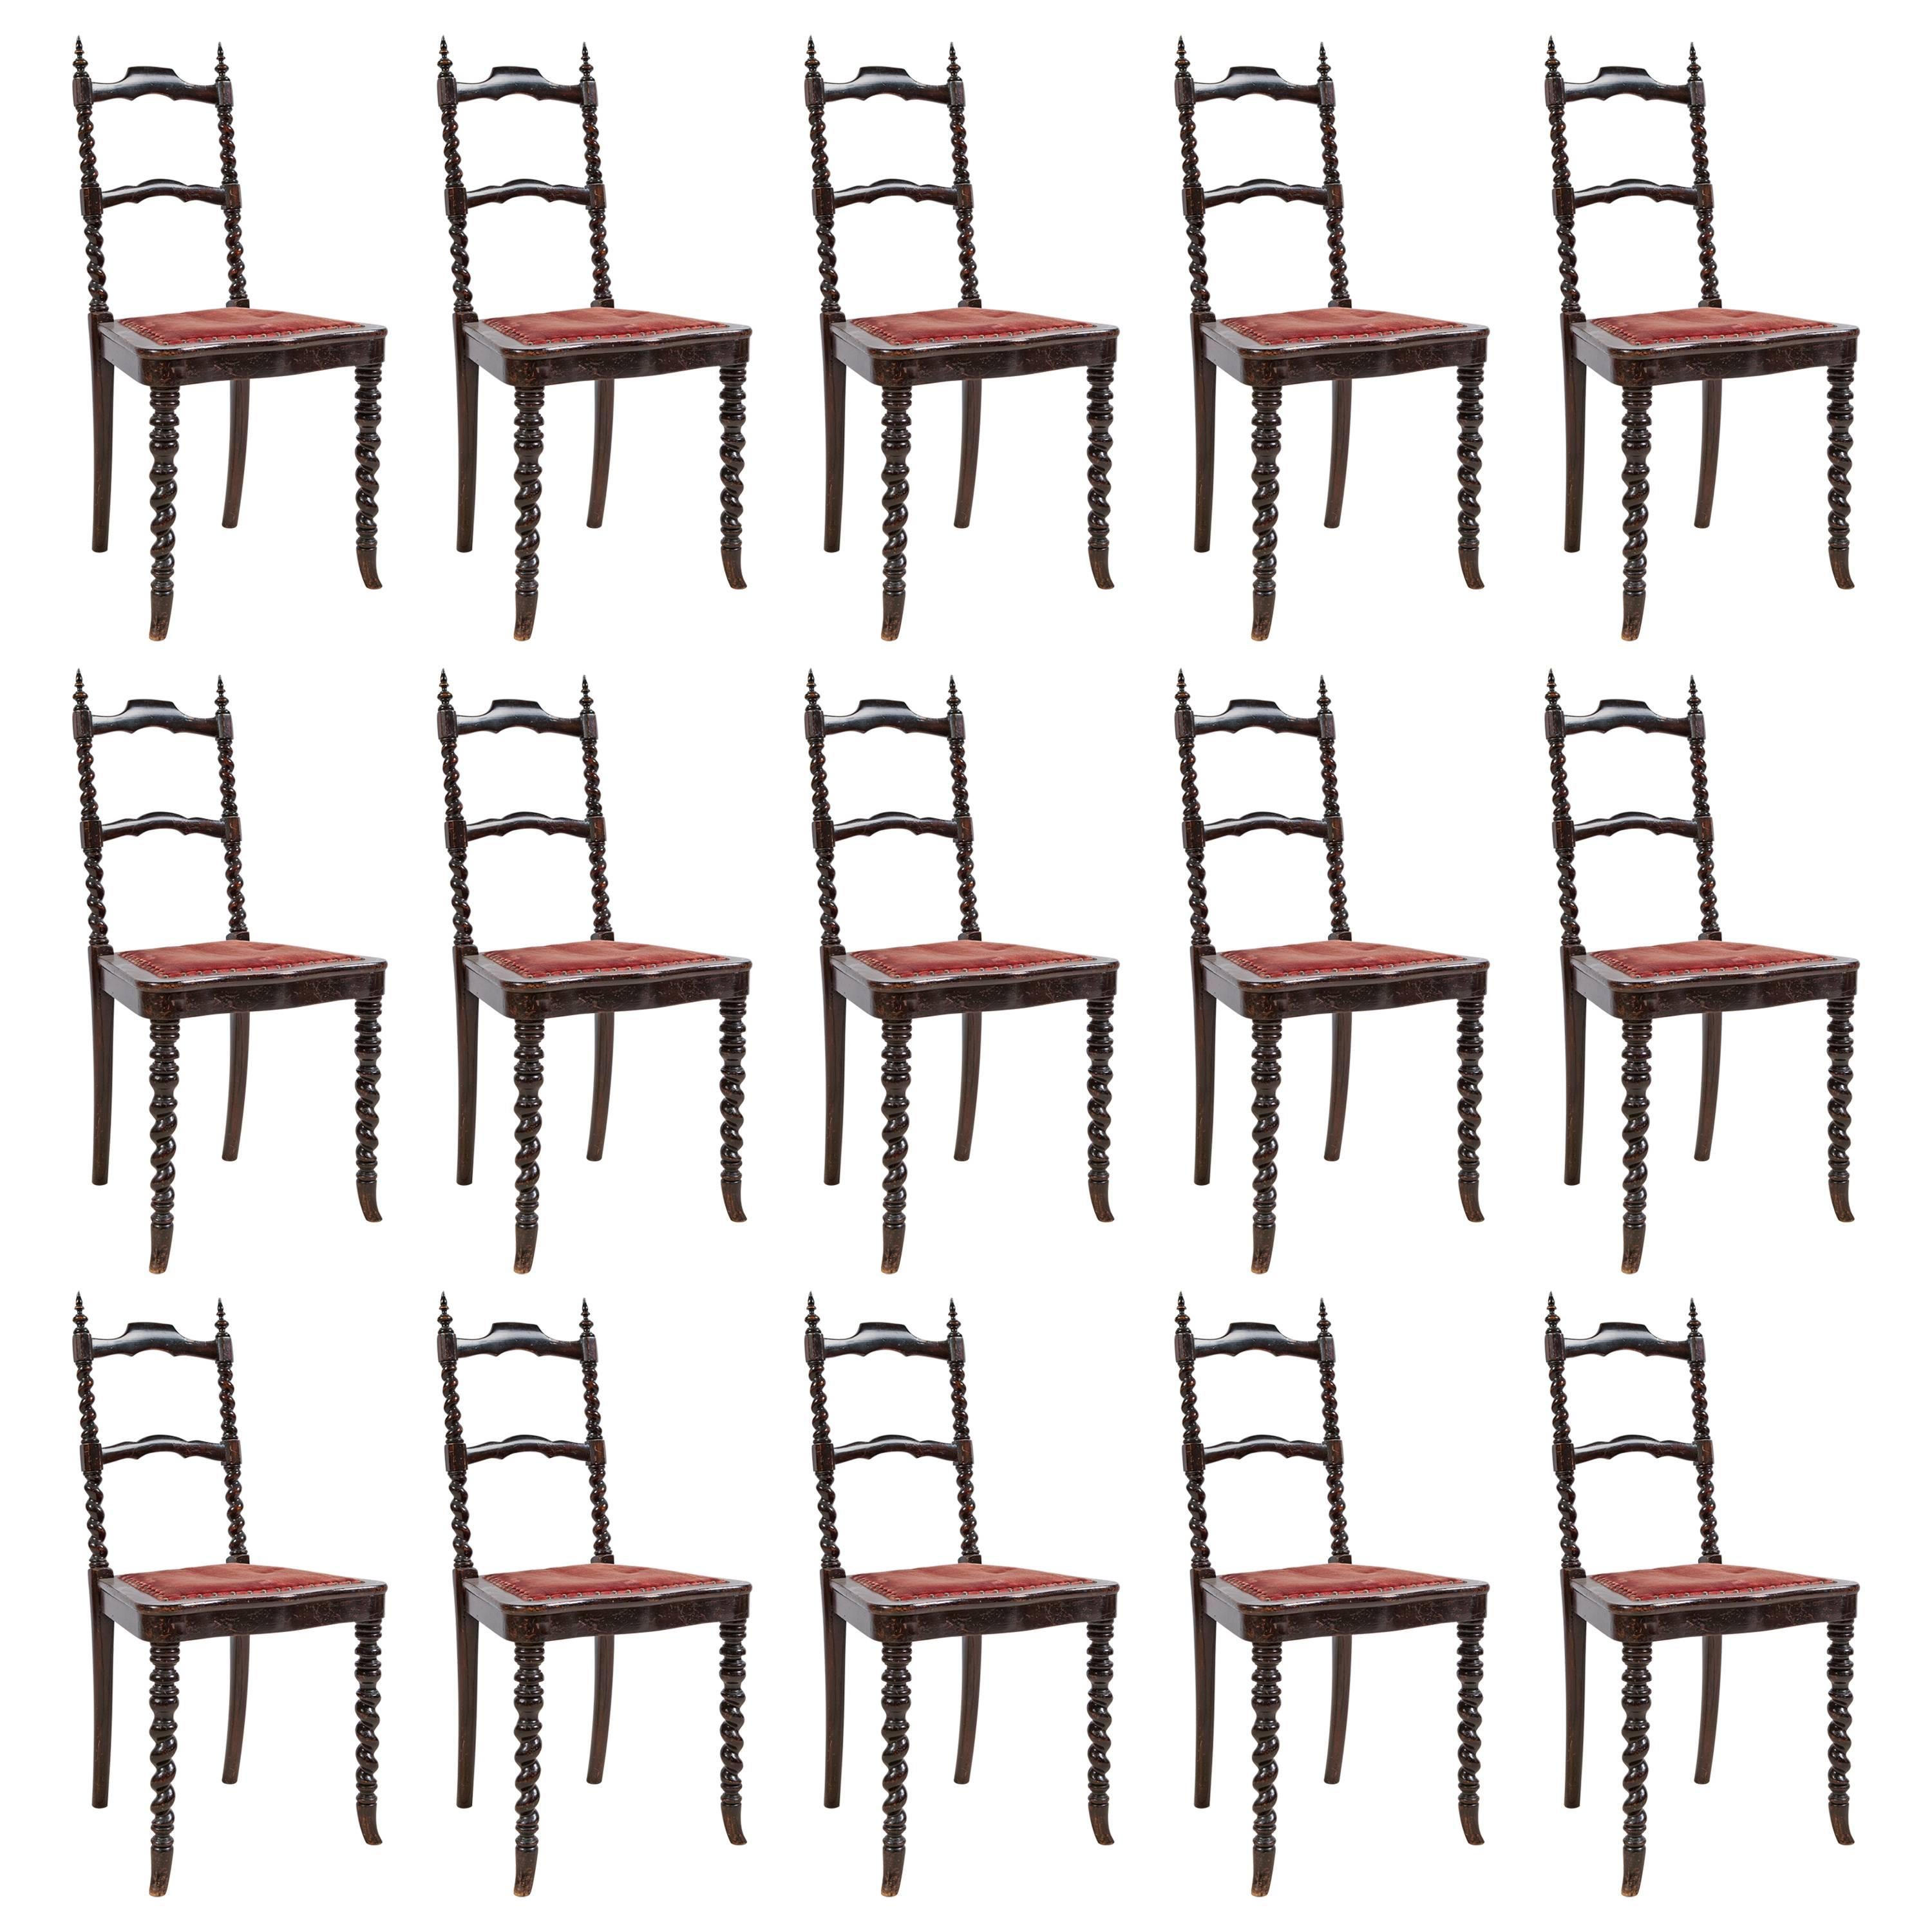 19th Century Set of 15 Neo-Gothic Dining Chairs in Ebonized Wood with Upholstery